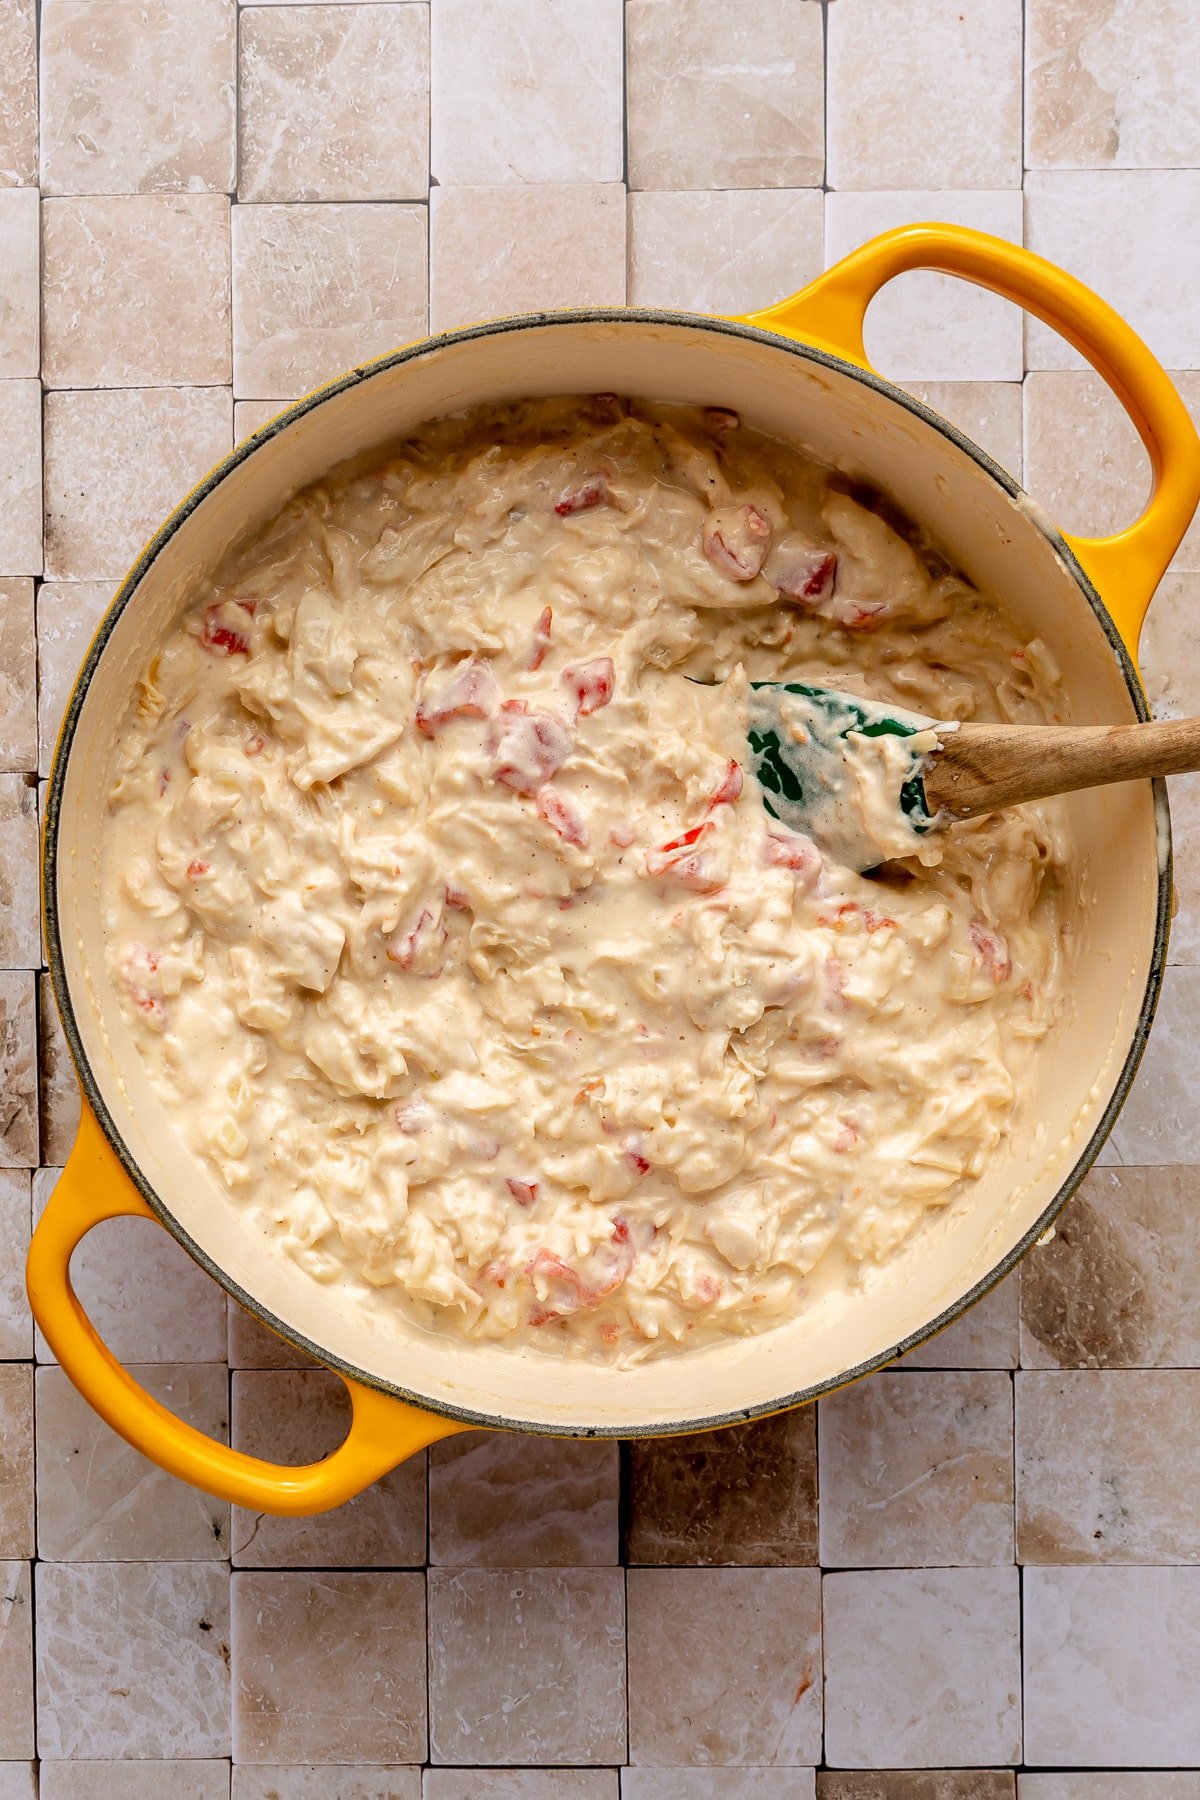 Shredded chicken and diced tomatoes have been added and all have been mixed to create a creamy mixture.